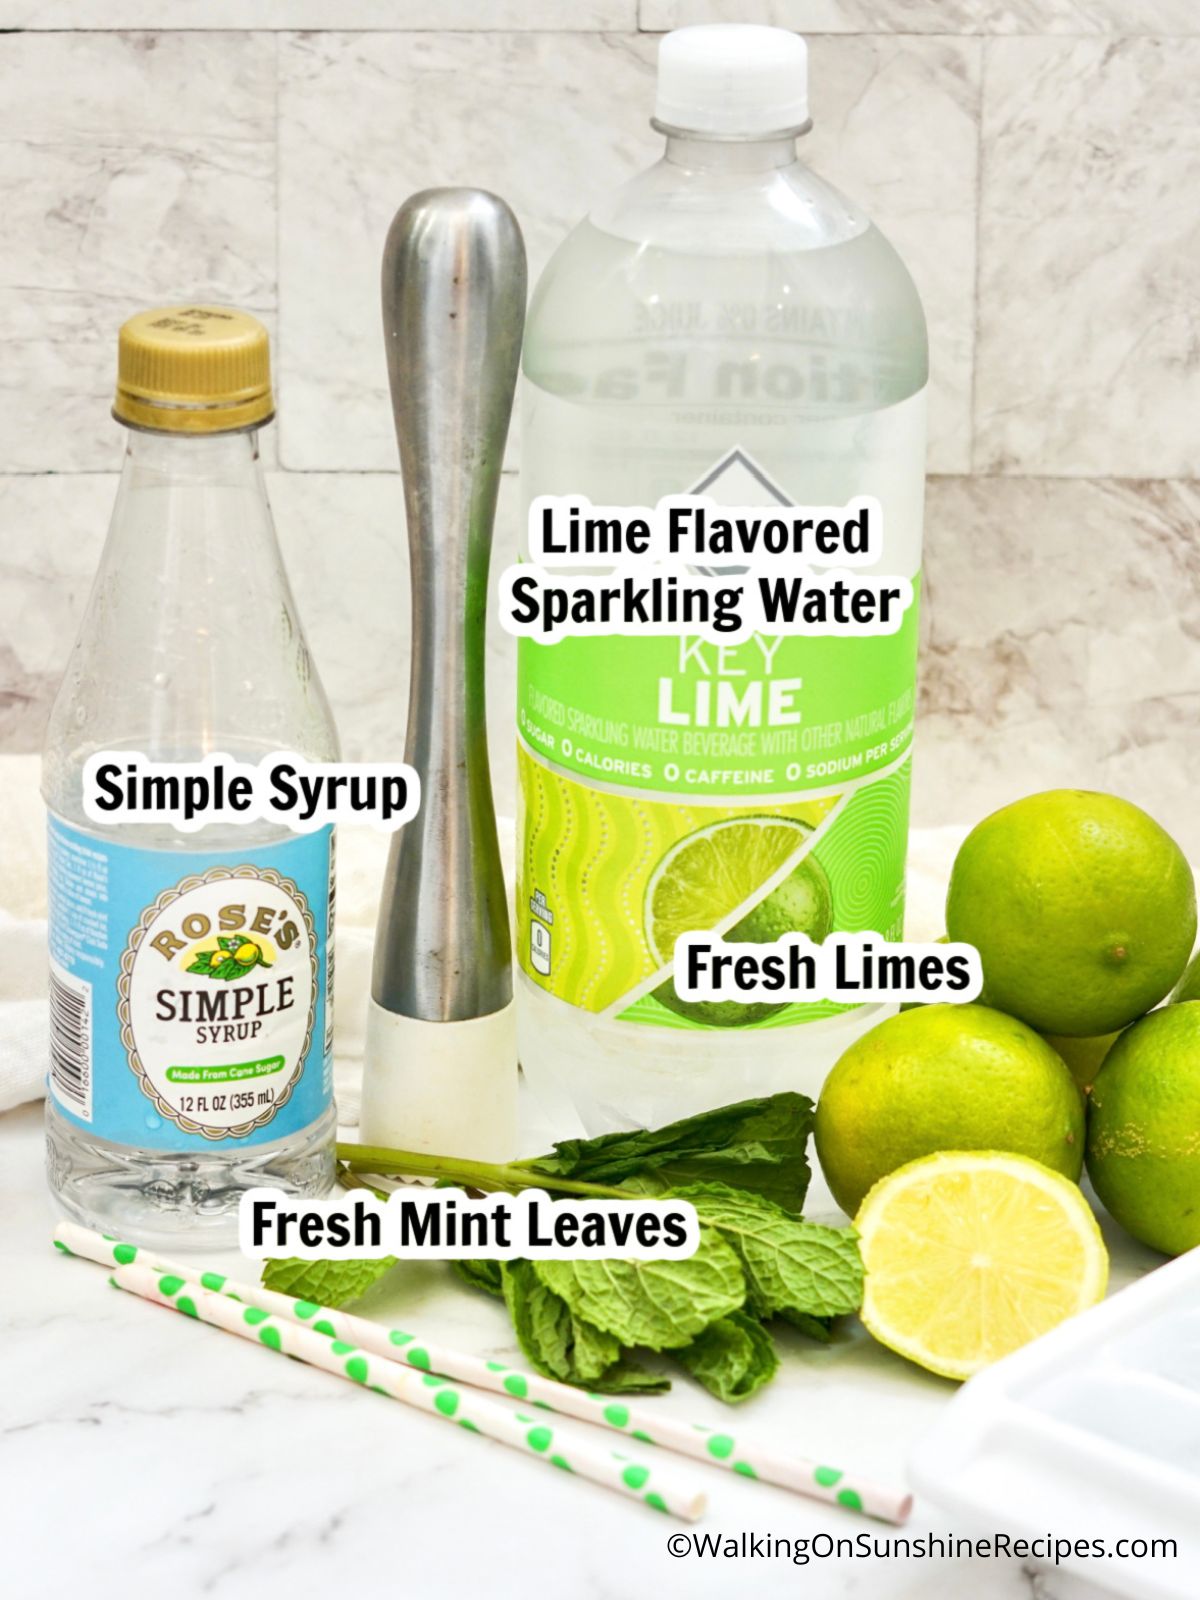 Ingredients for sparkling lime water.